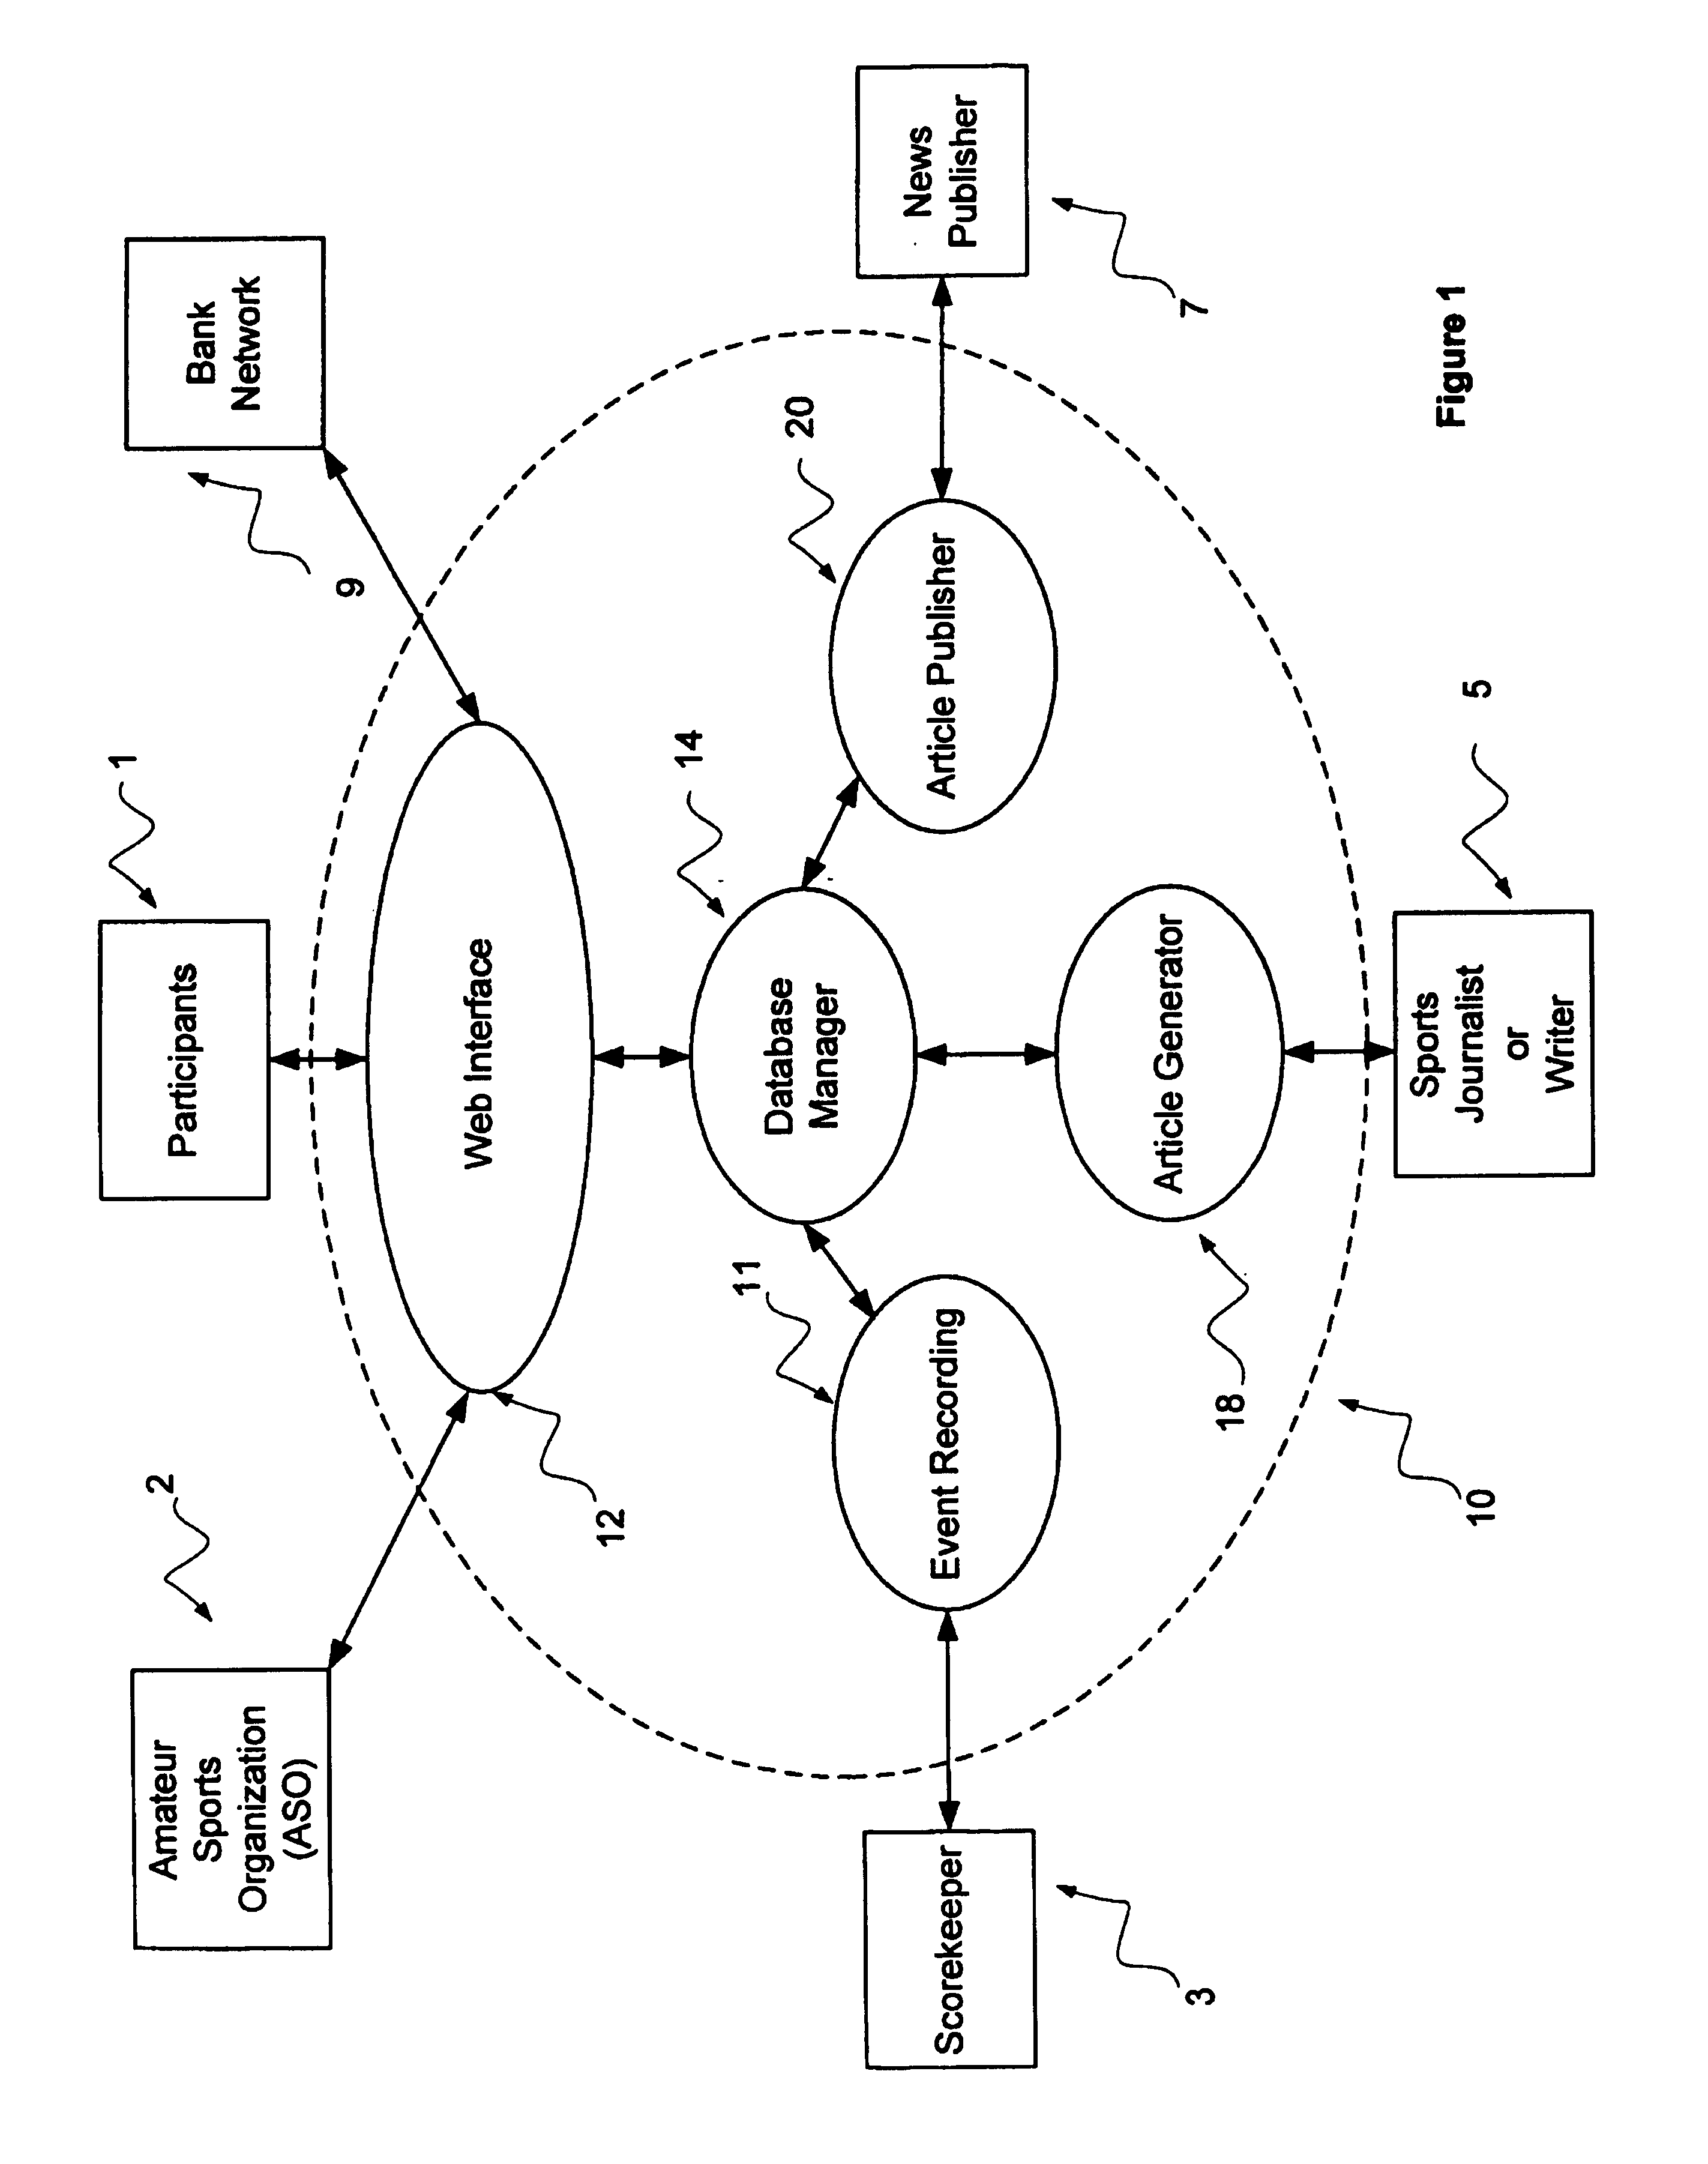 System and method for automatically generating a narrative report of an event, such as a sporting event